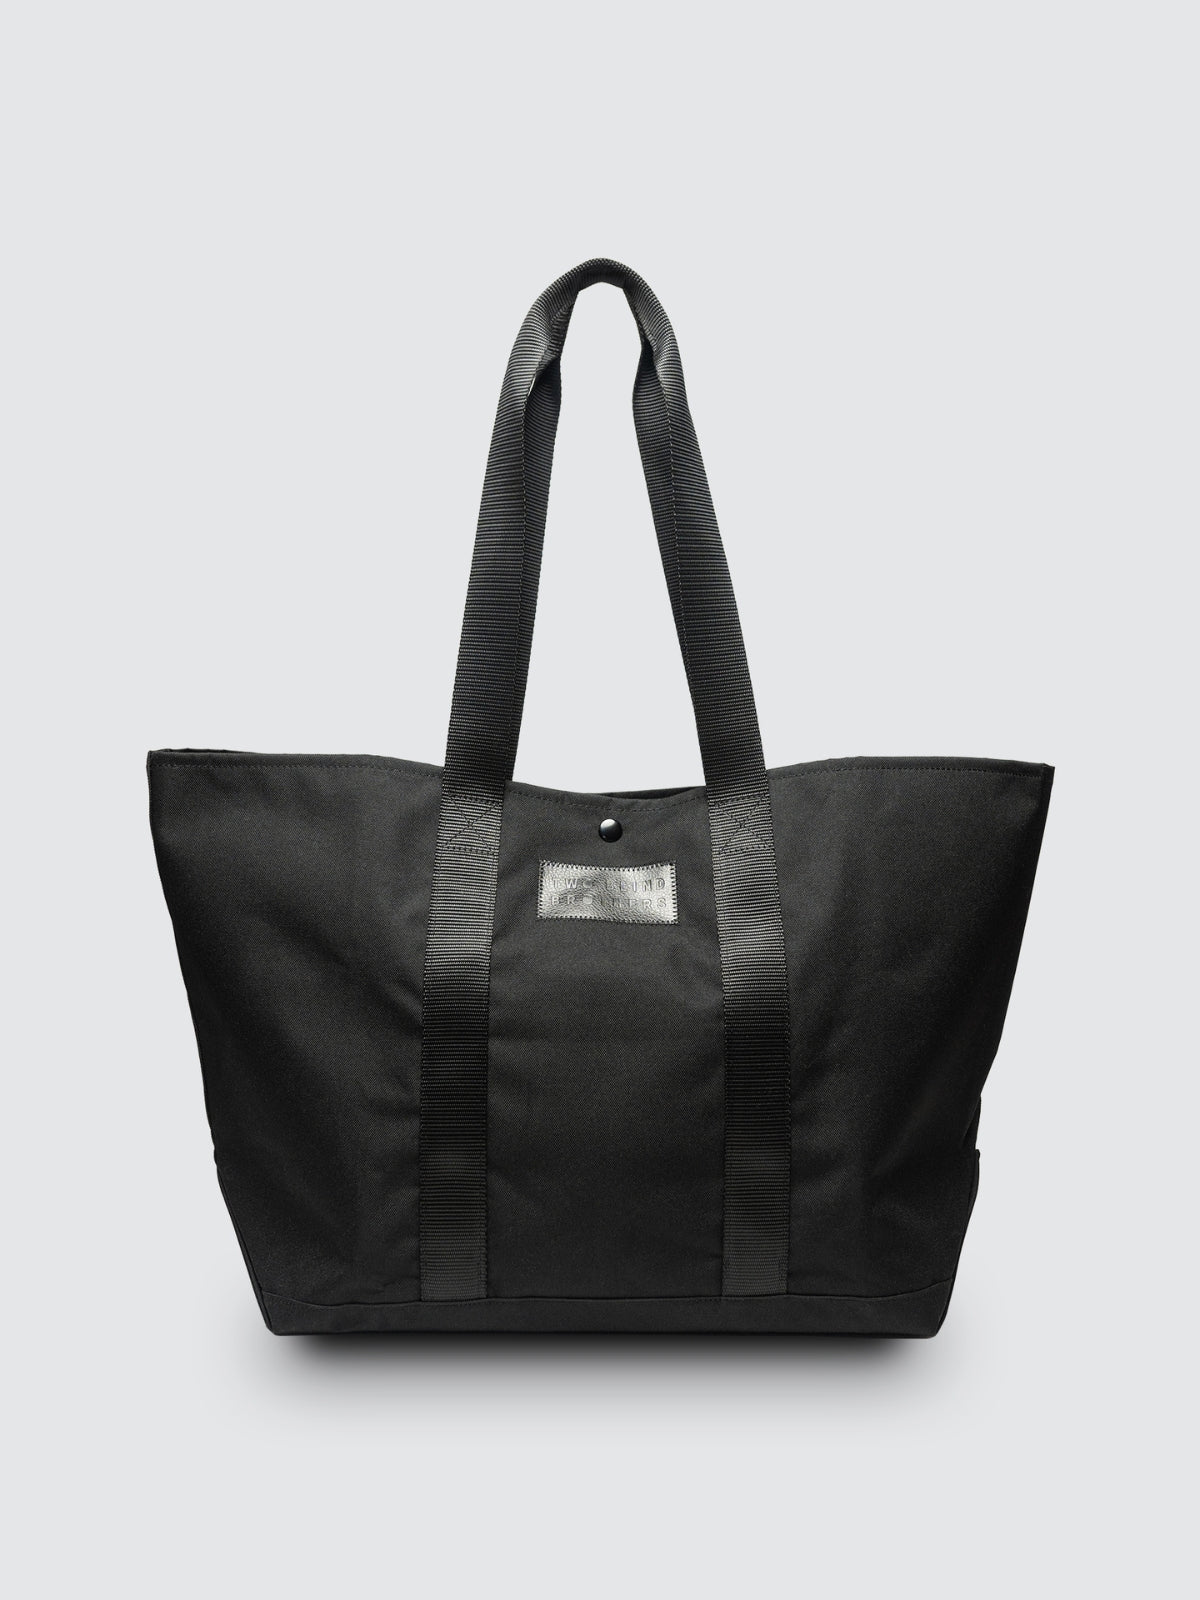 Two Blind Brothers - Gift Everything Tote Bag Black